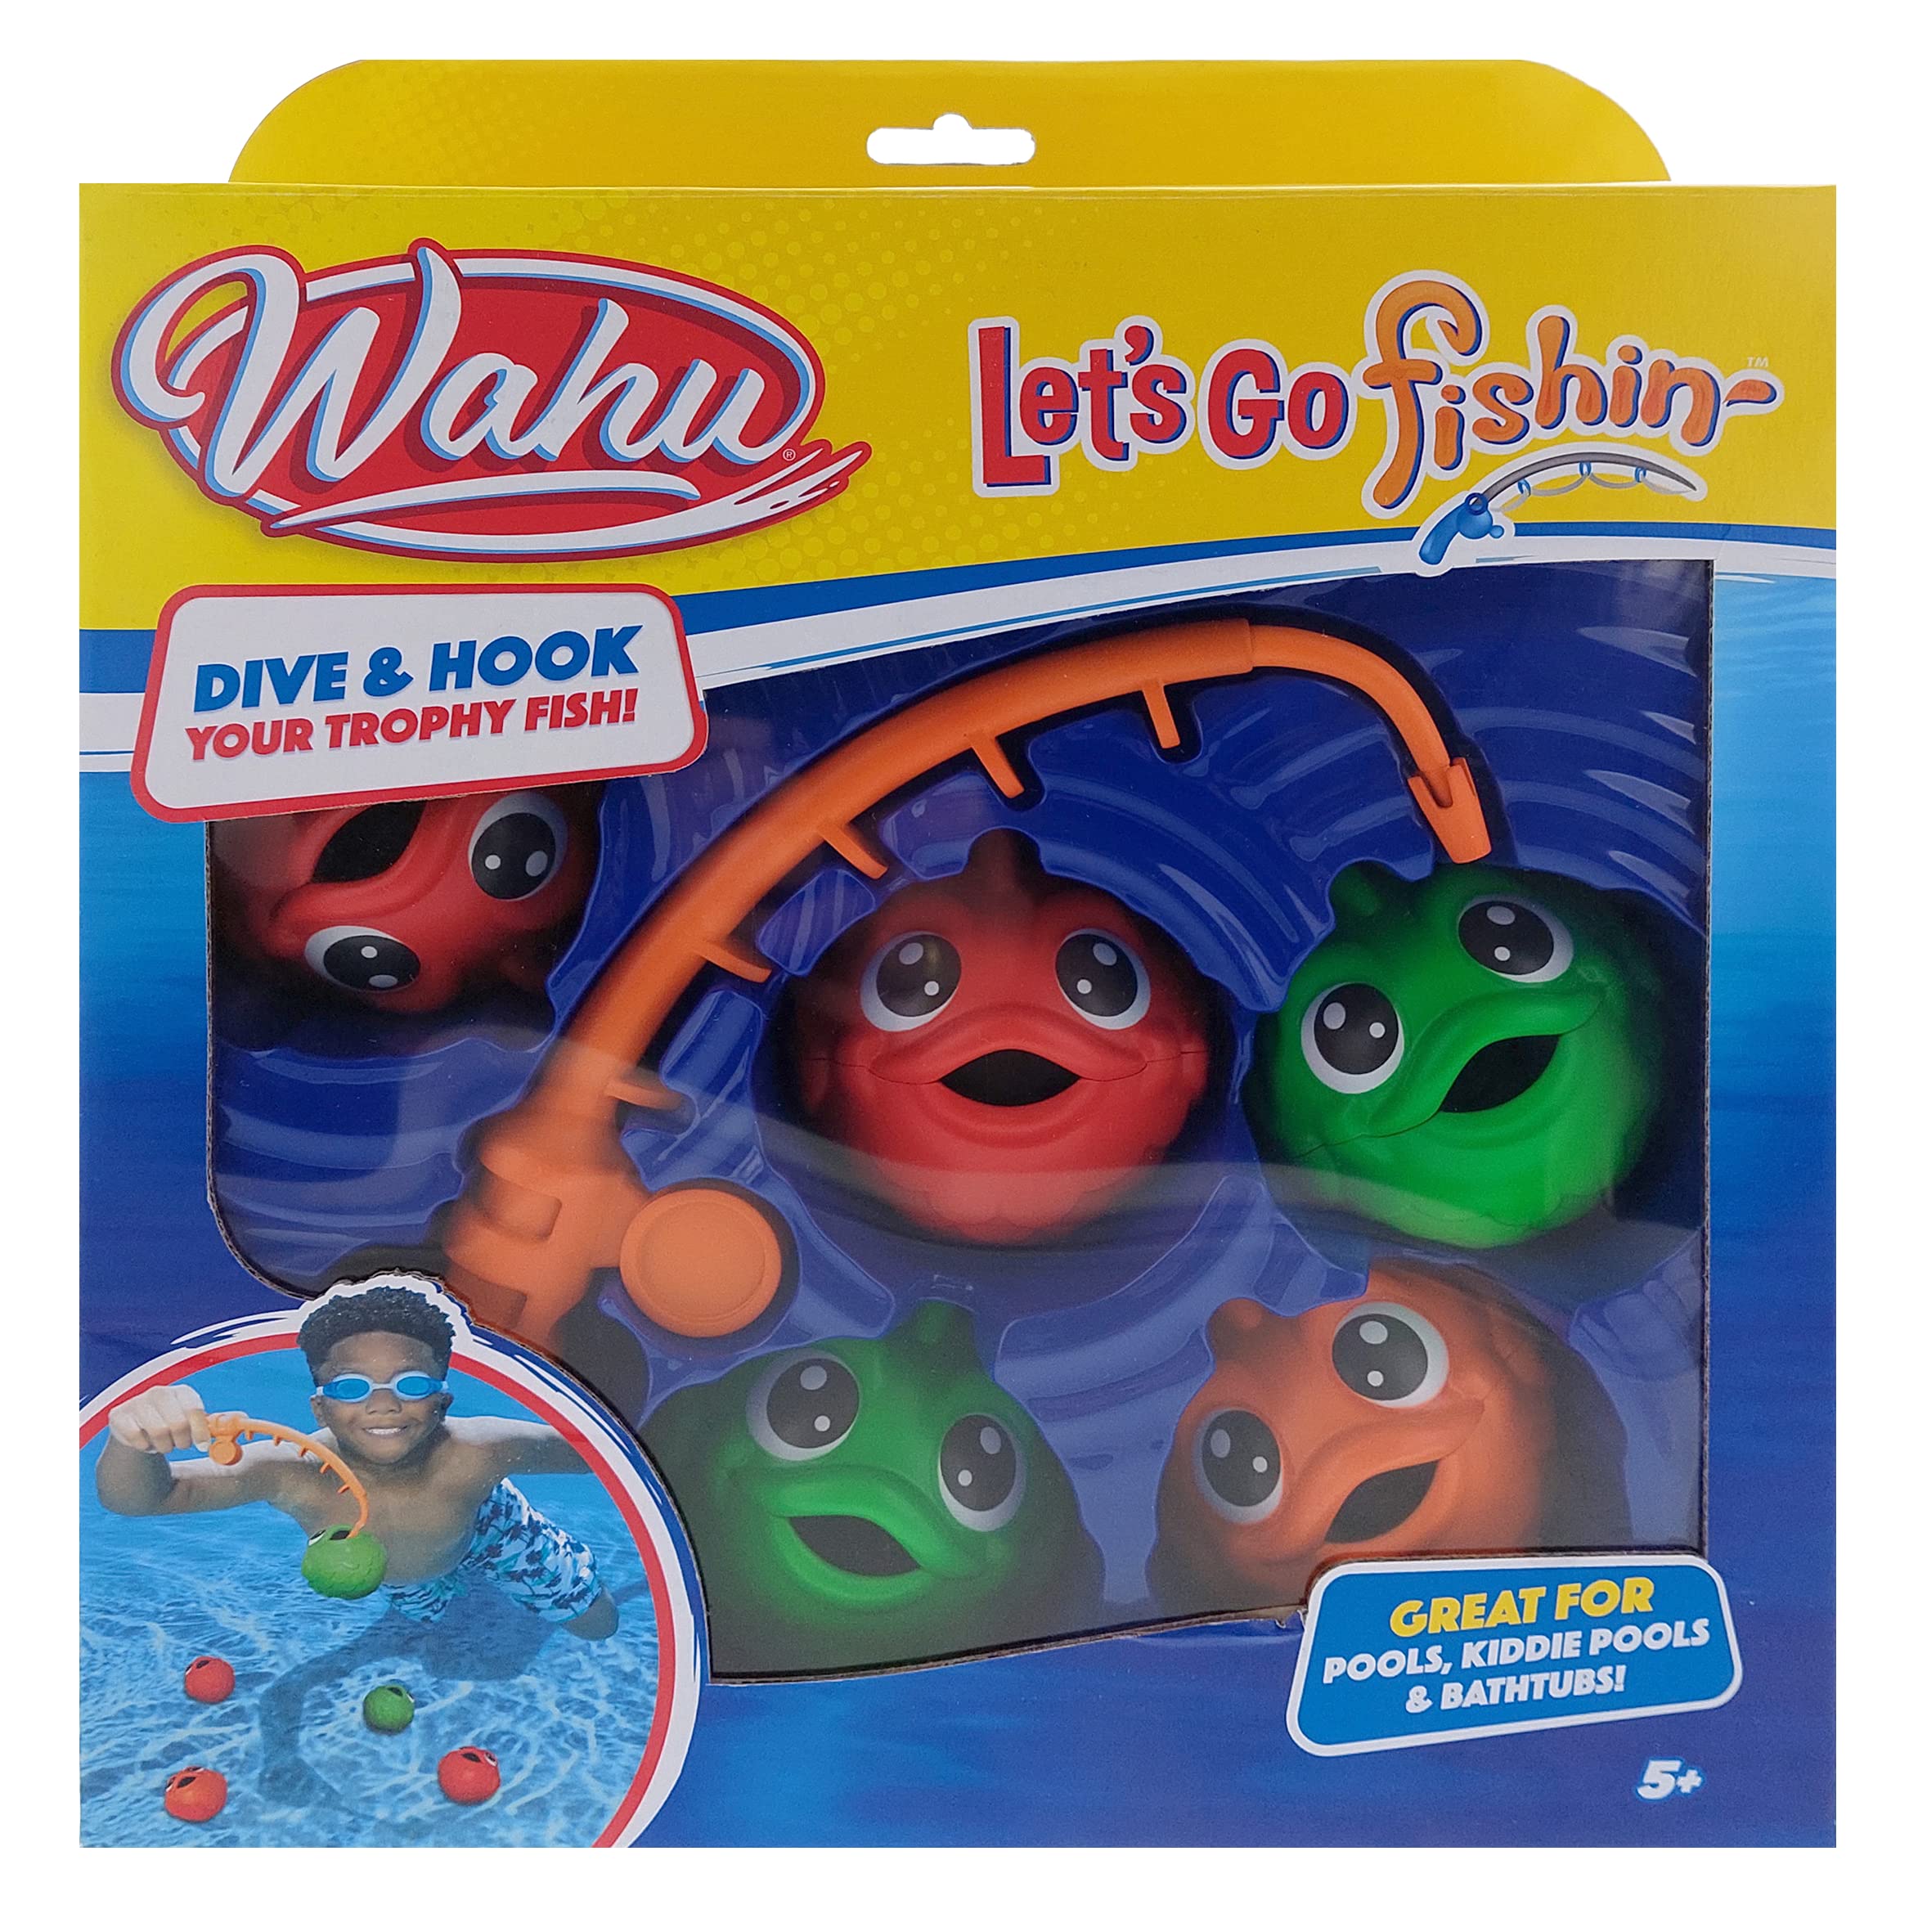 WAHU Let's Go Fishin' 6-Piece Kids Pool and Bath Toy Set for Ages 5+, Kids Fishing Water Toys Set with 1 Fishing Pole and 5 Colorful Fish